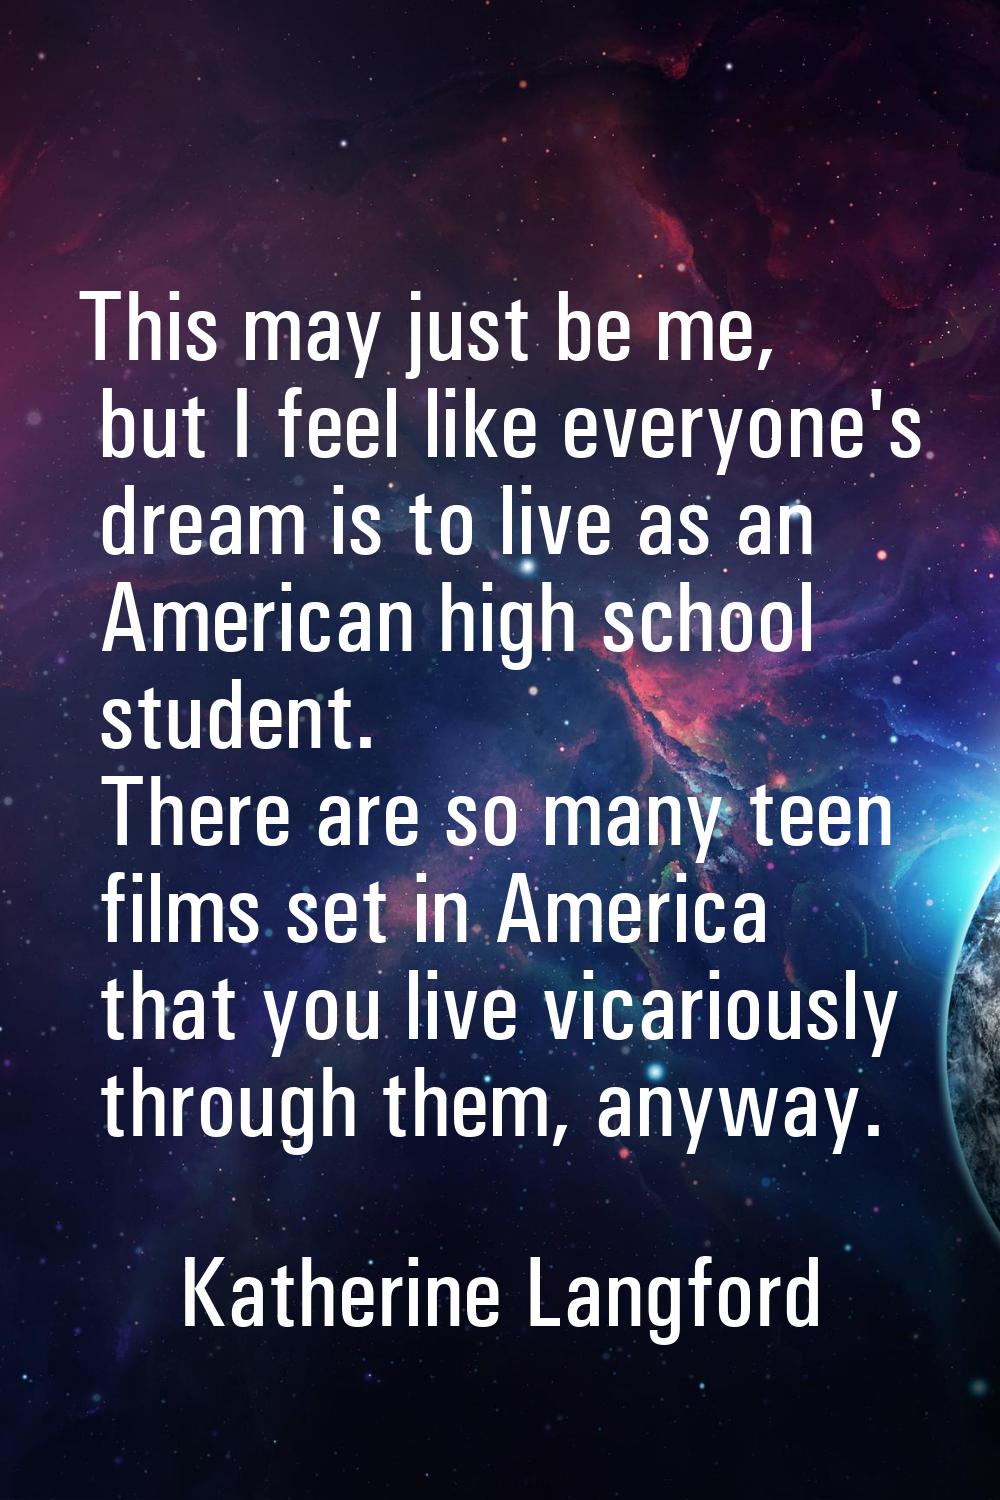 This may just be me, but I feel like everyone's dream is to live as an American high school student